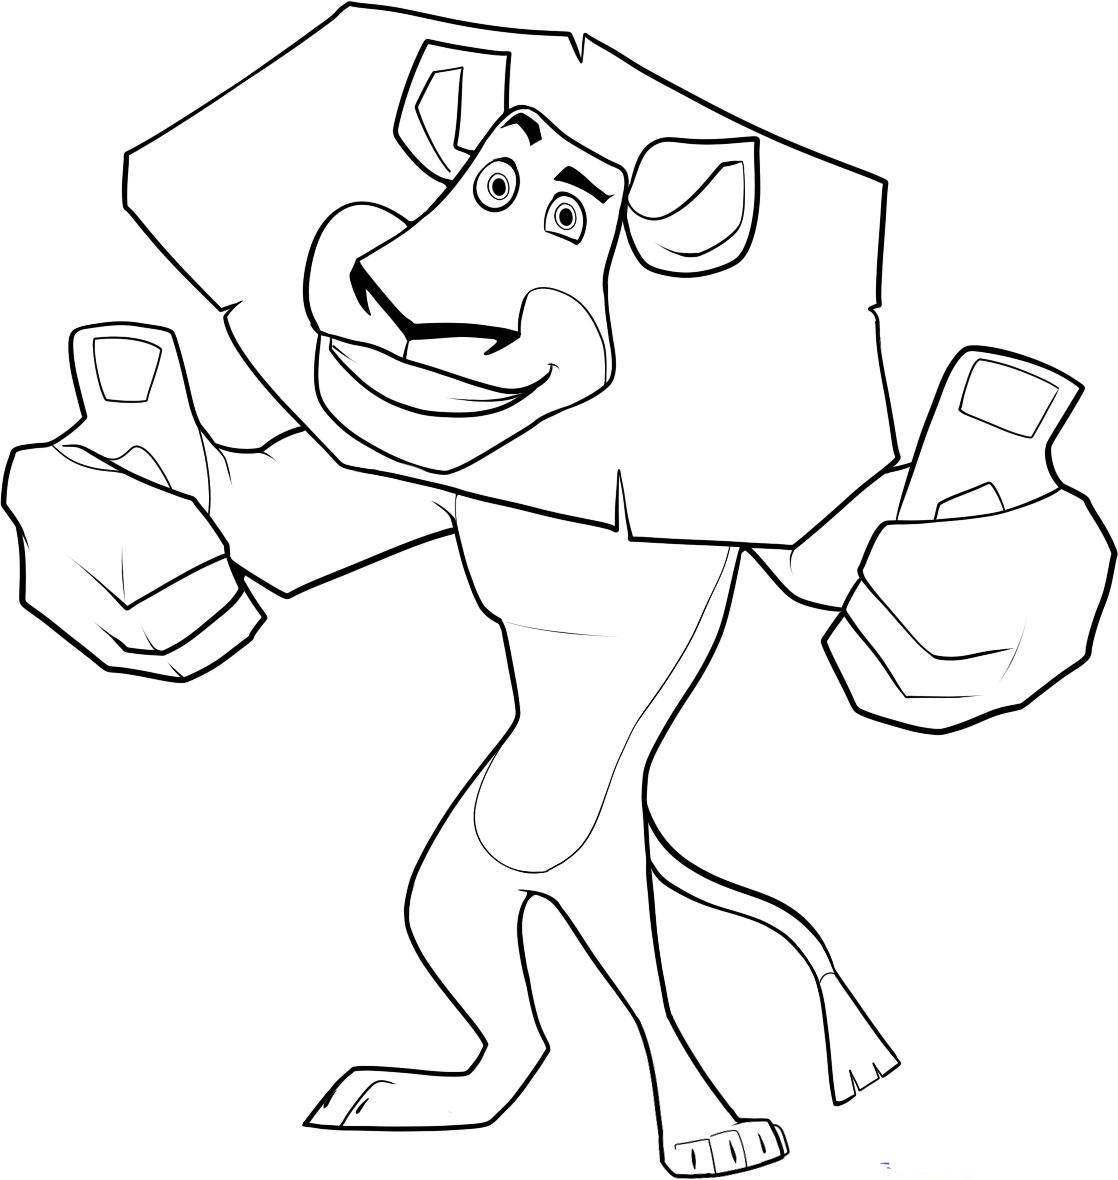 Free Madagascar drawing to print and color - Madagascar Kids Coloring Pages